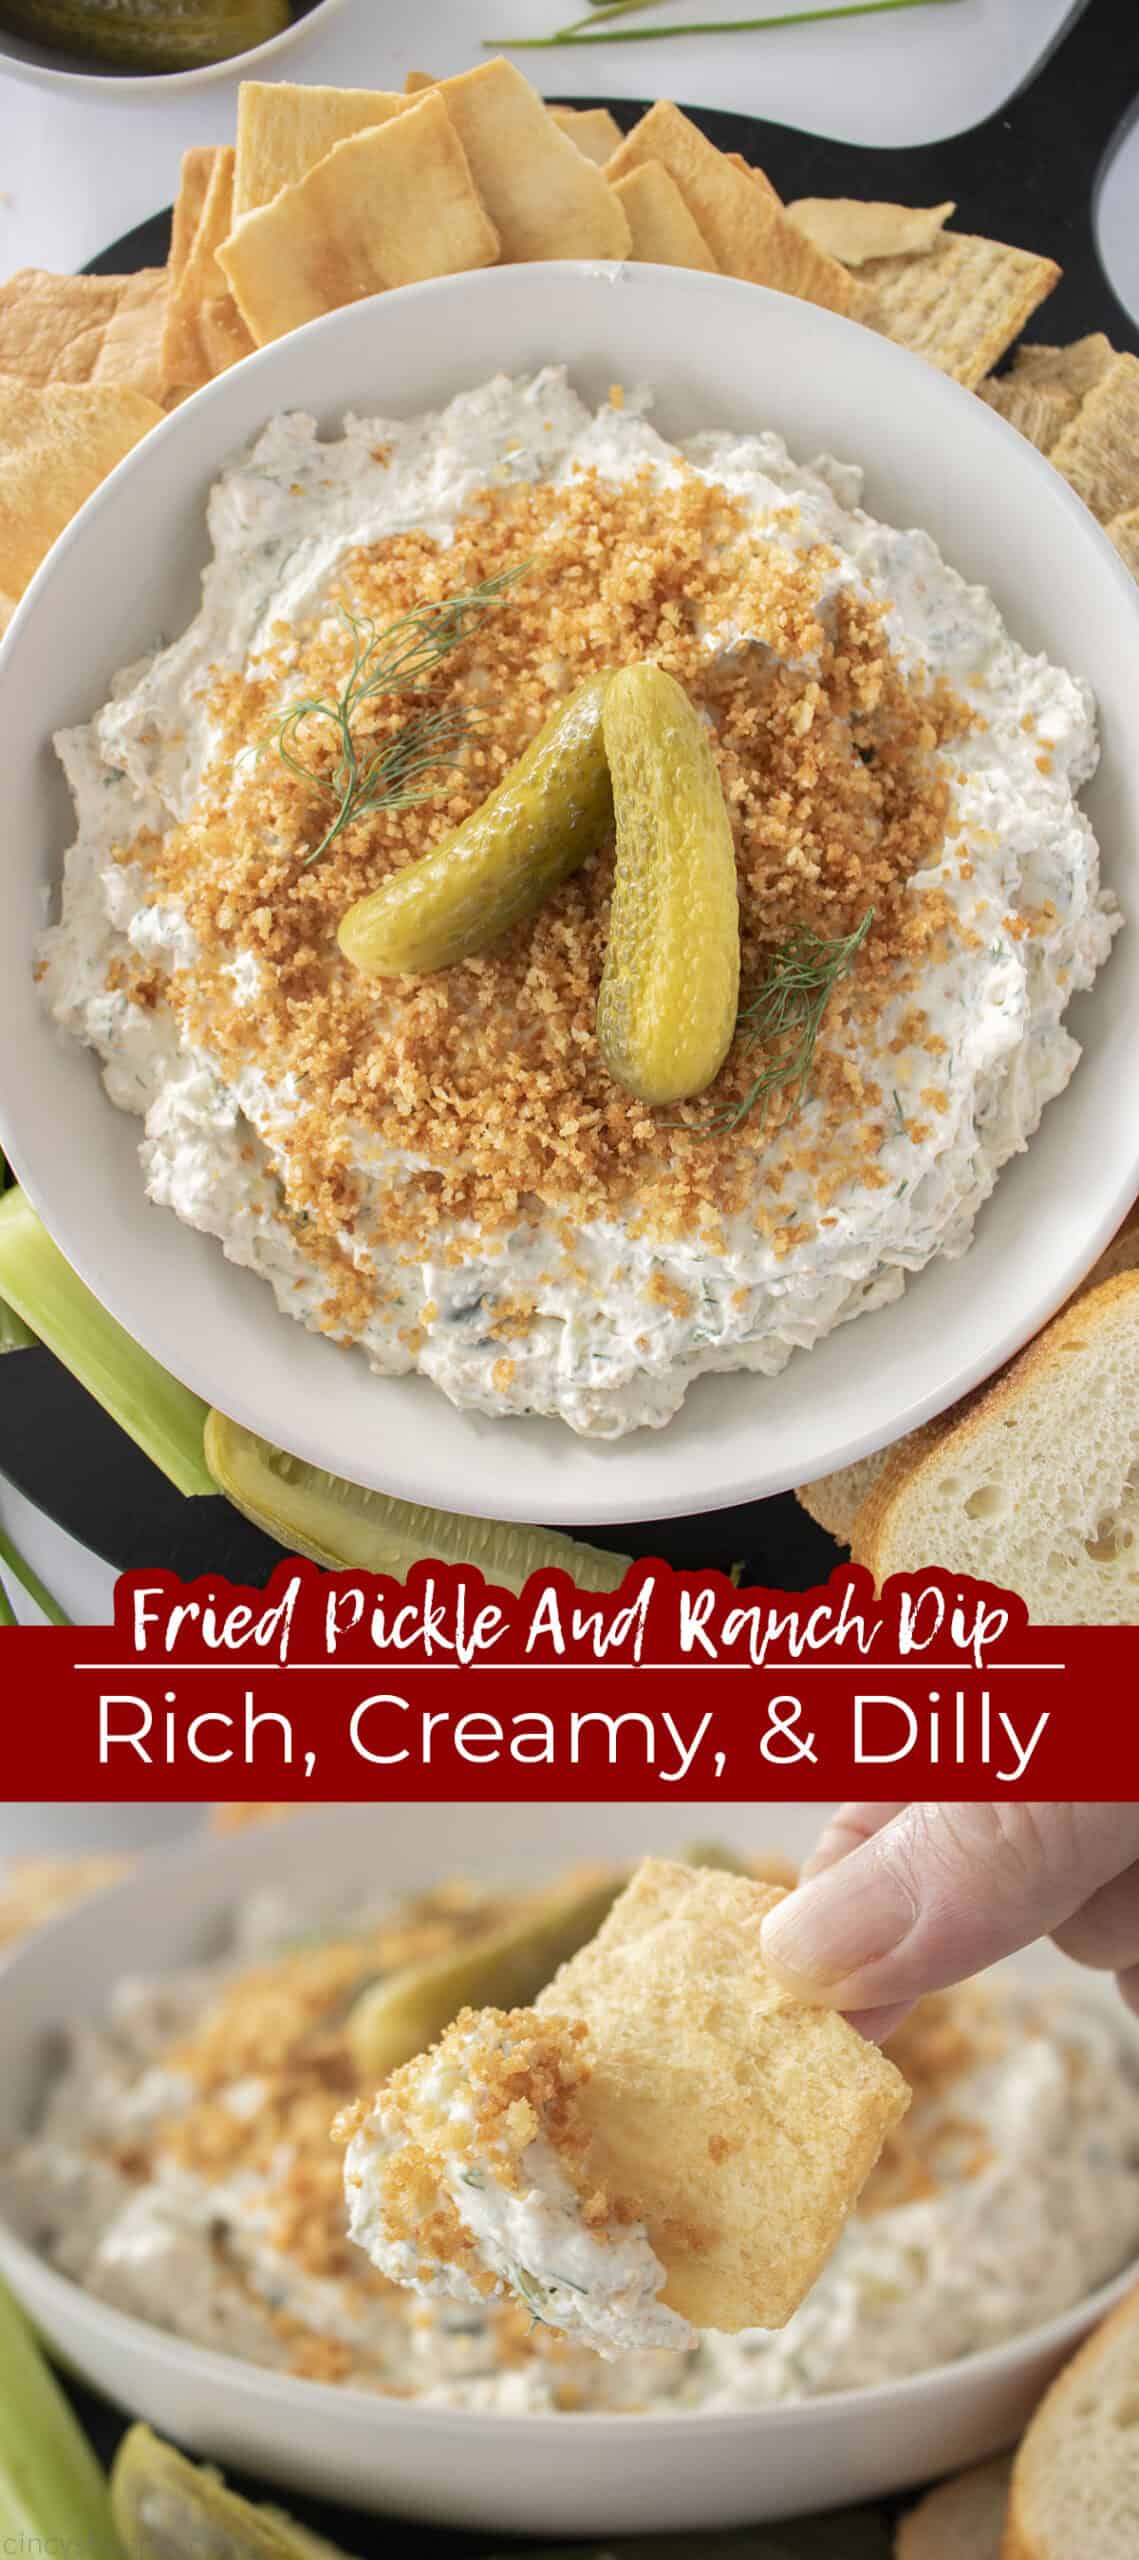 Fried Pickle and Ranch Dip Rich, Creamy, & Dilly long pin.